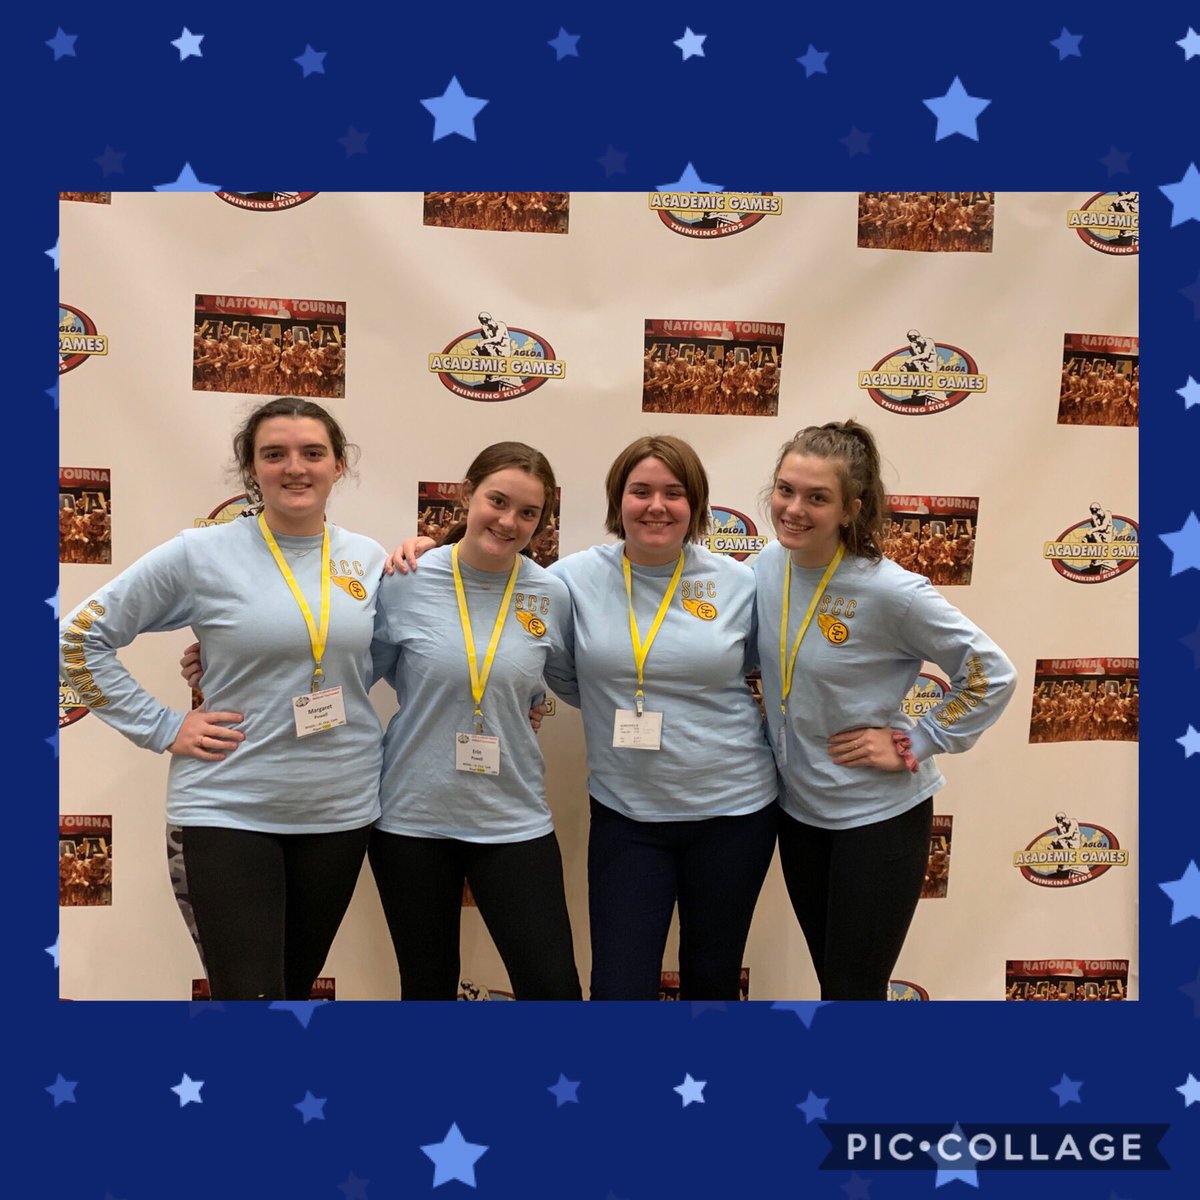 Congratulations to our new Academic Games team, who recently competed in Orlando at the 54th annual Academic Games National Competition. Our team was awarded honorable mention nationally in the game of propaganda. Continue to fly high and shine bright! 💙💫@AGLOA